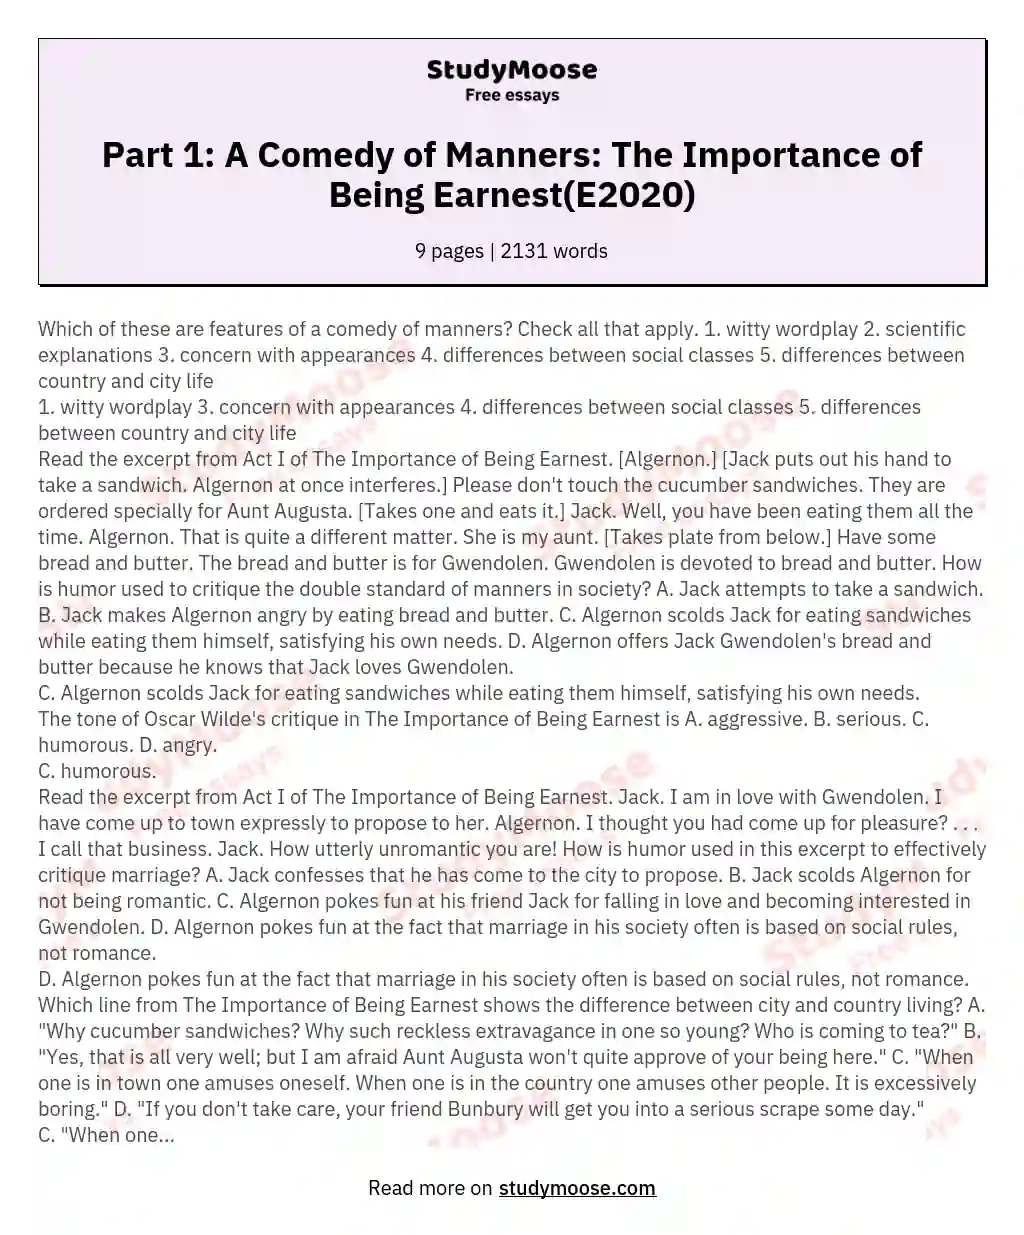 Part 1: A Comedy of Manners: The Importance of Being Earnest(E2020) essay